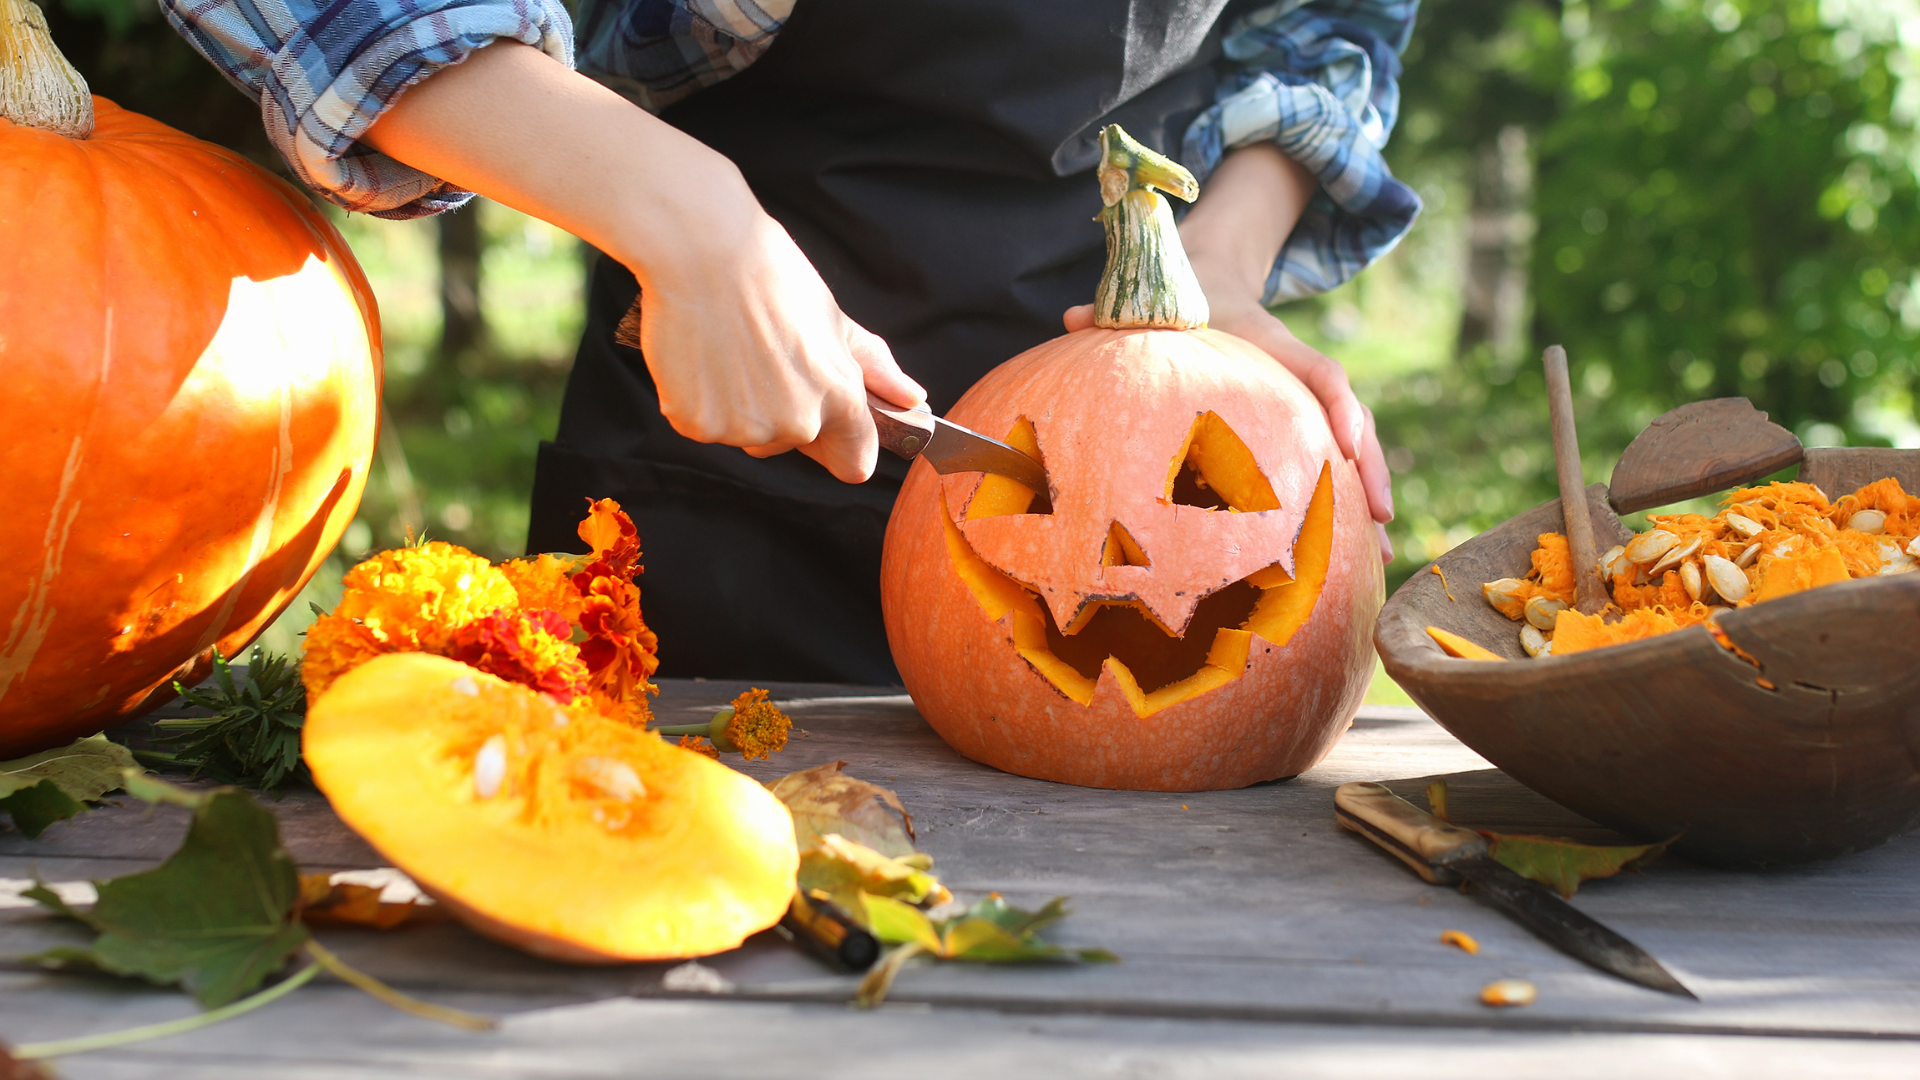 Carve and Compost: A Greener Approach to Pumpkin Decorating for Halloween